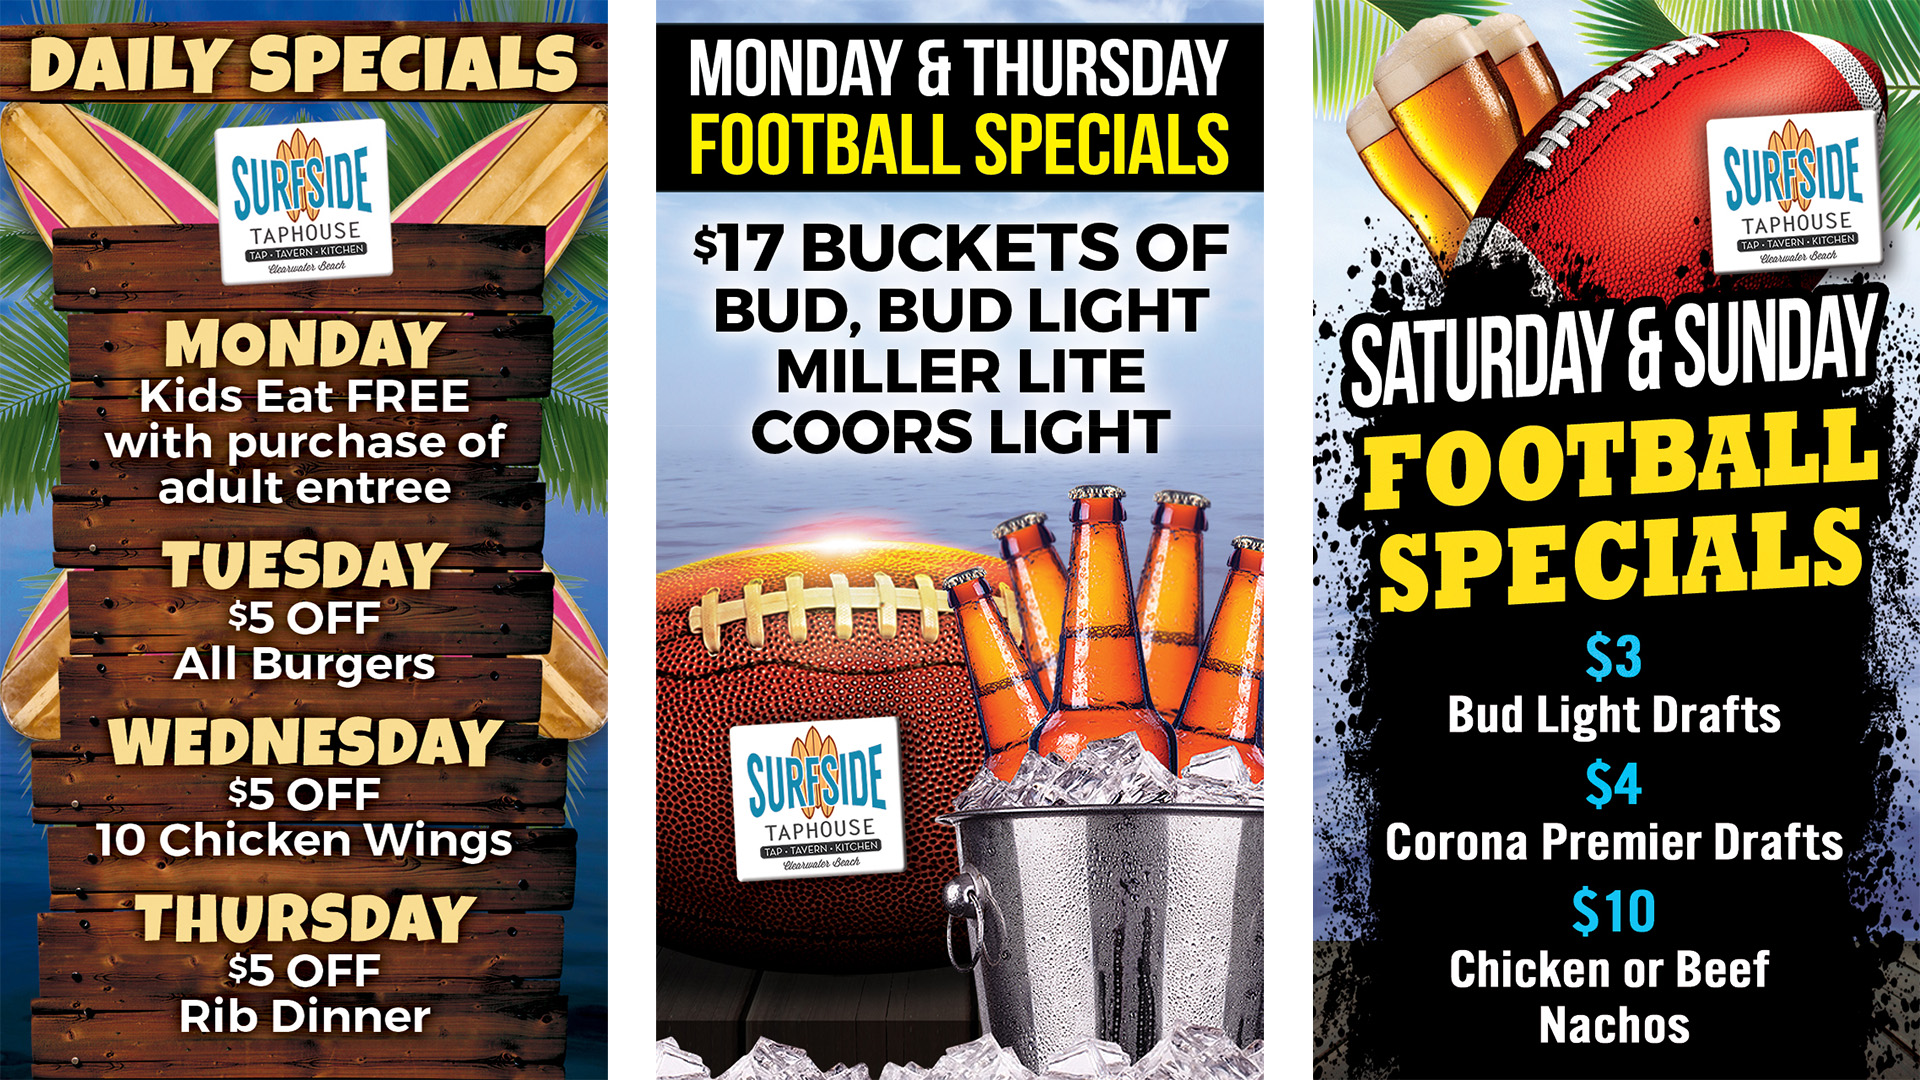 Daily Specials - Surfside Taphouse